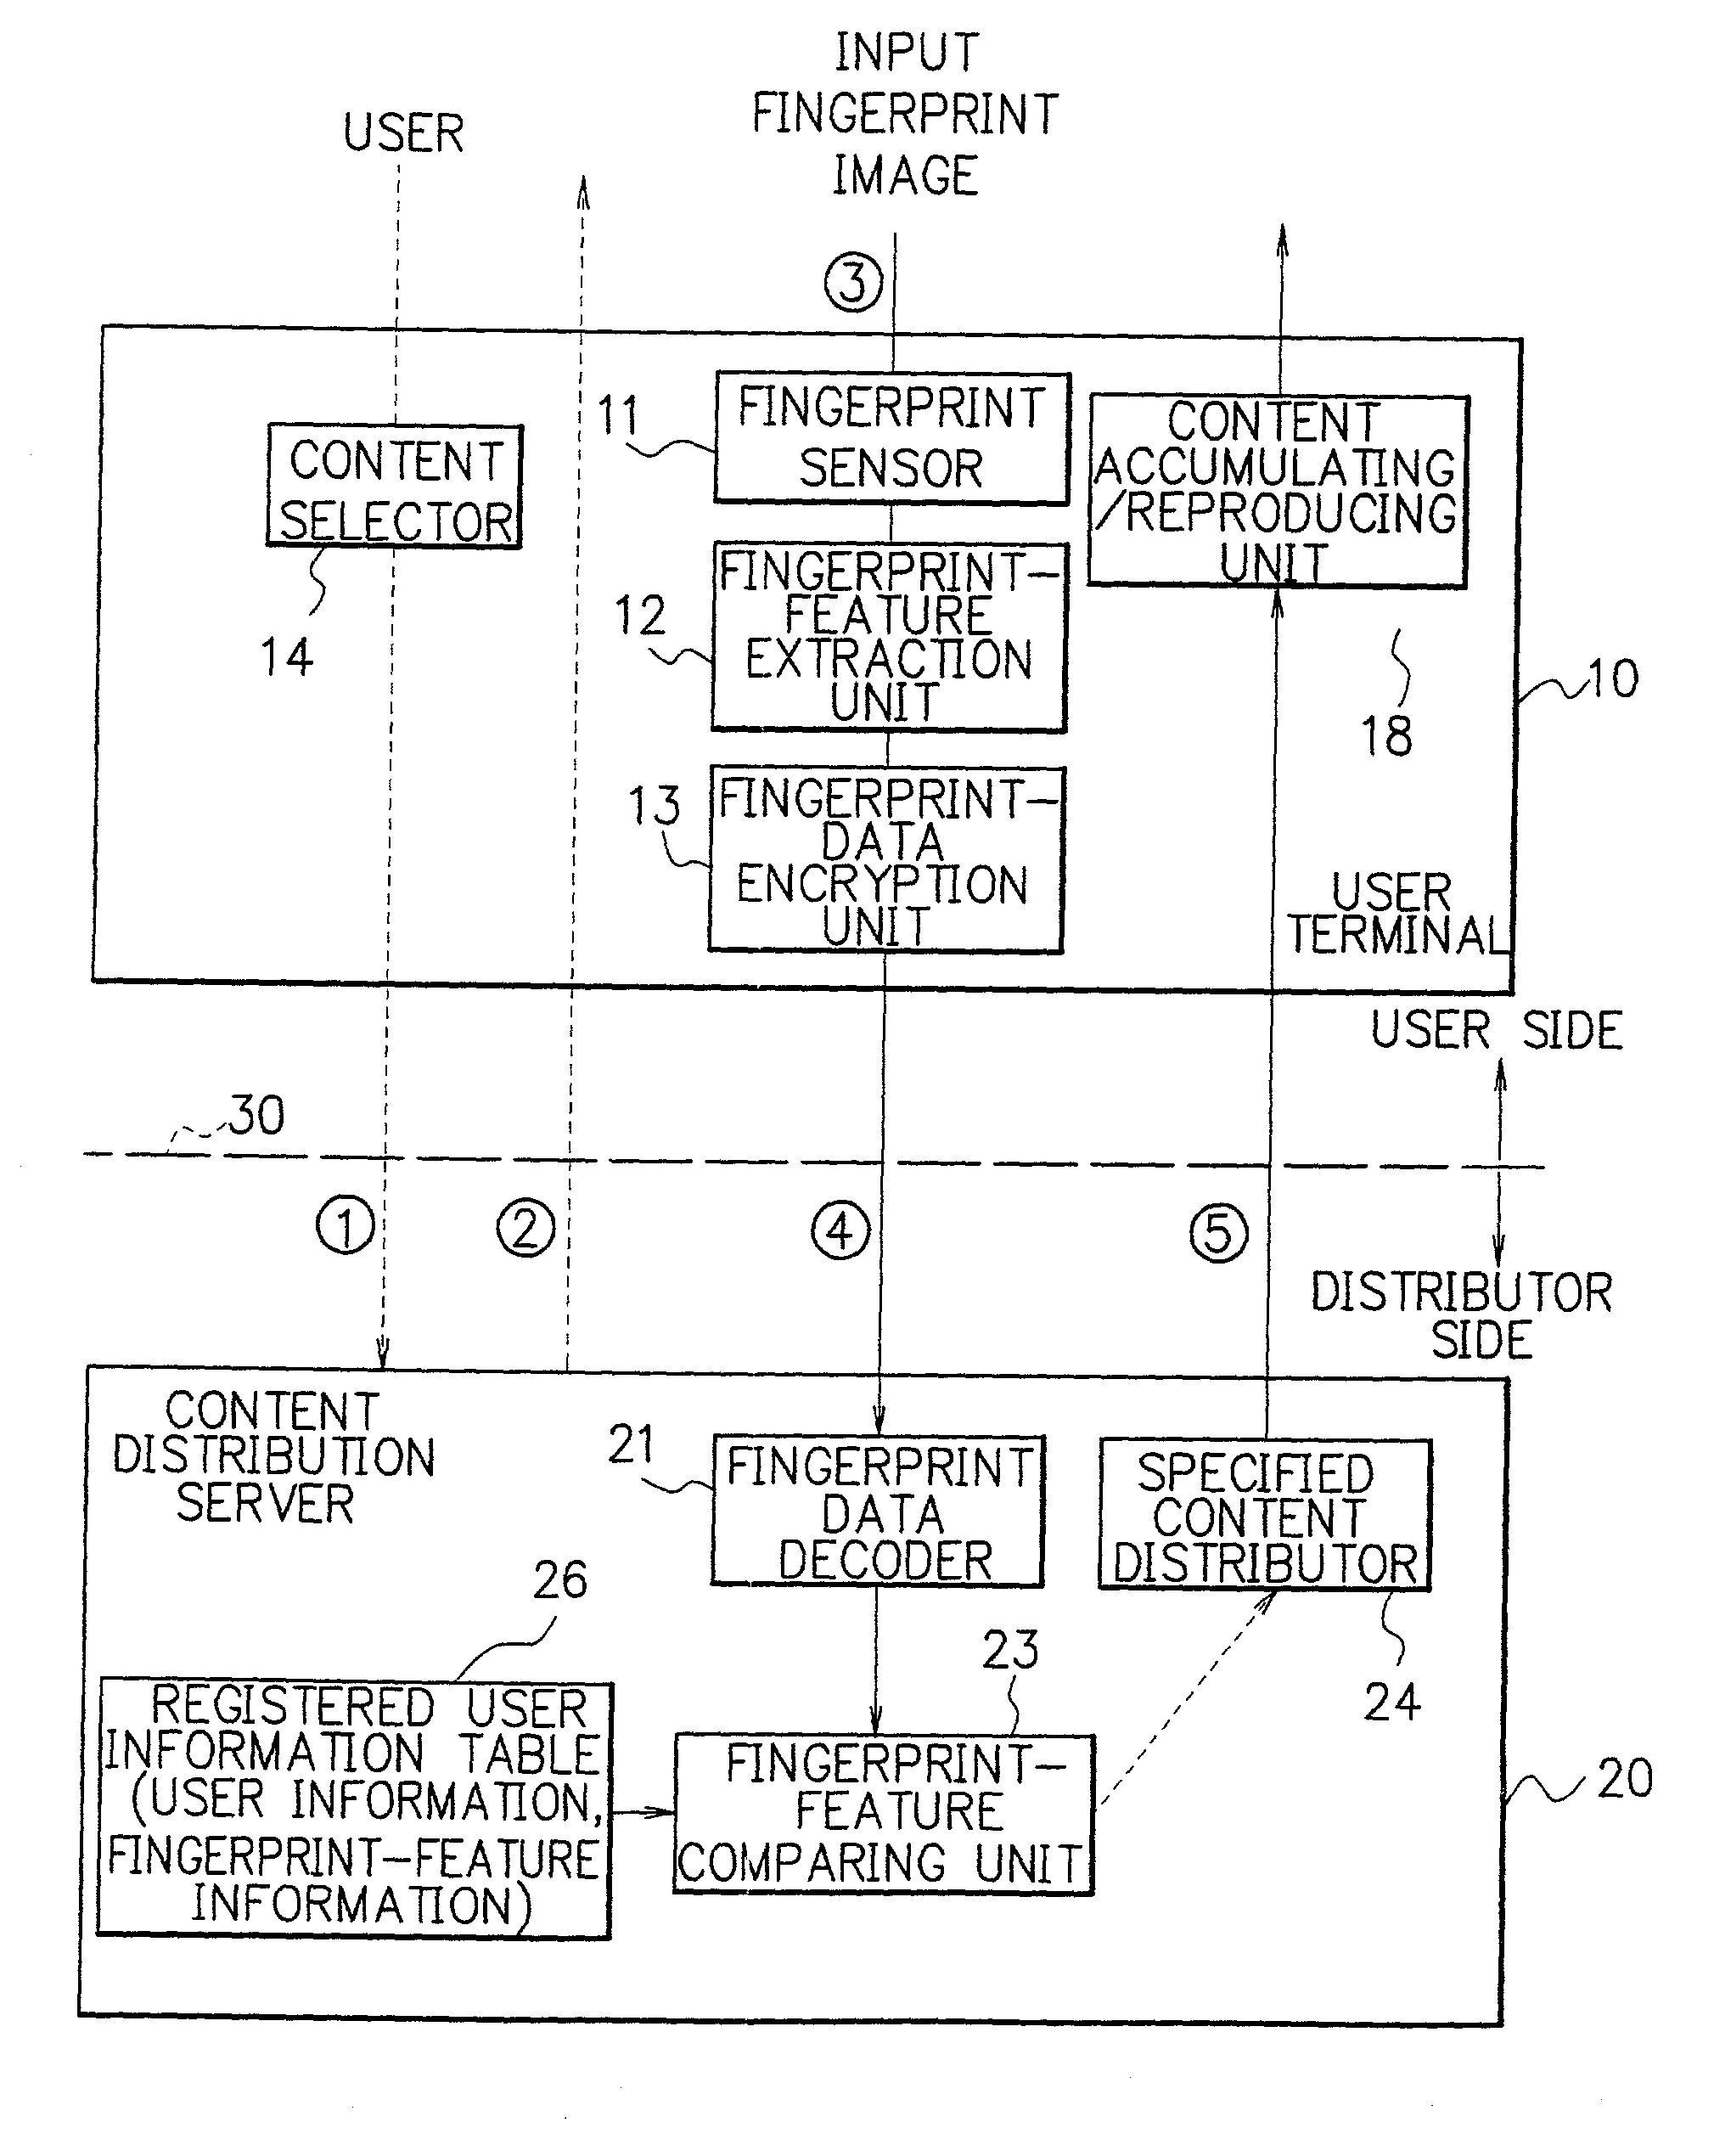 Method and system for authenticating content distribution and content reproduction requests based on biometric features